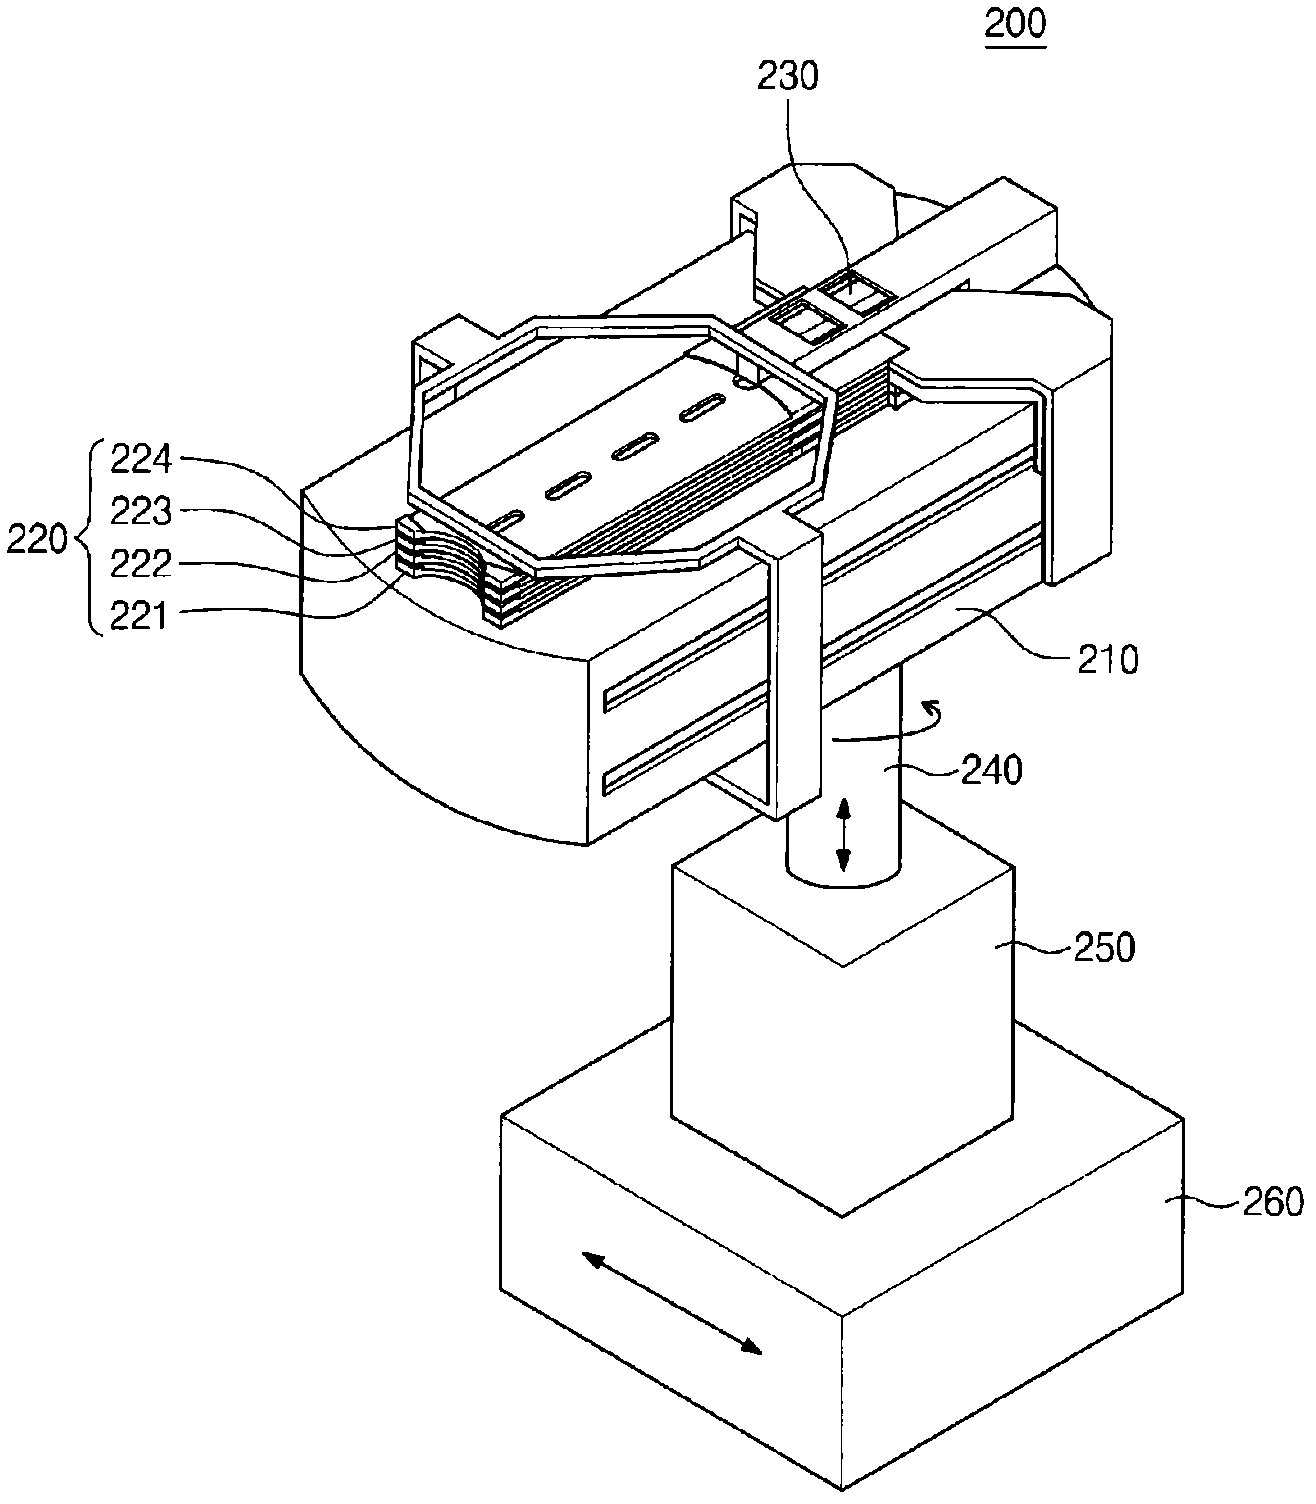 Substrate-transferring device, substrate-processing apparatus having same, and method of transferring substrate using substrate-transferring device